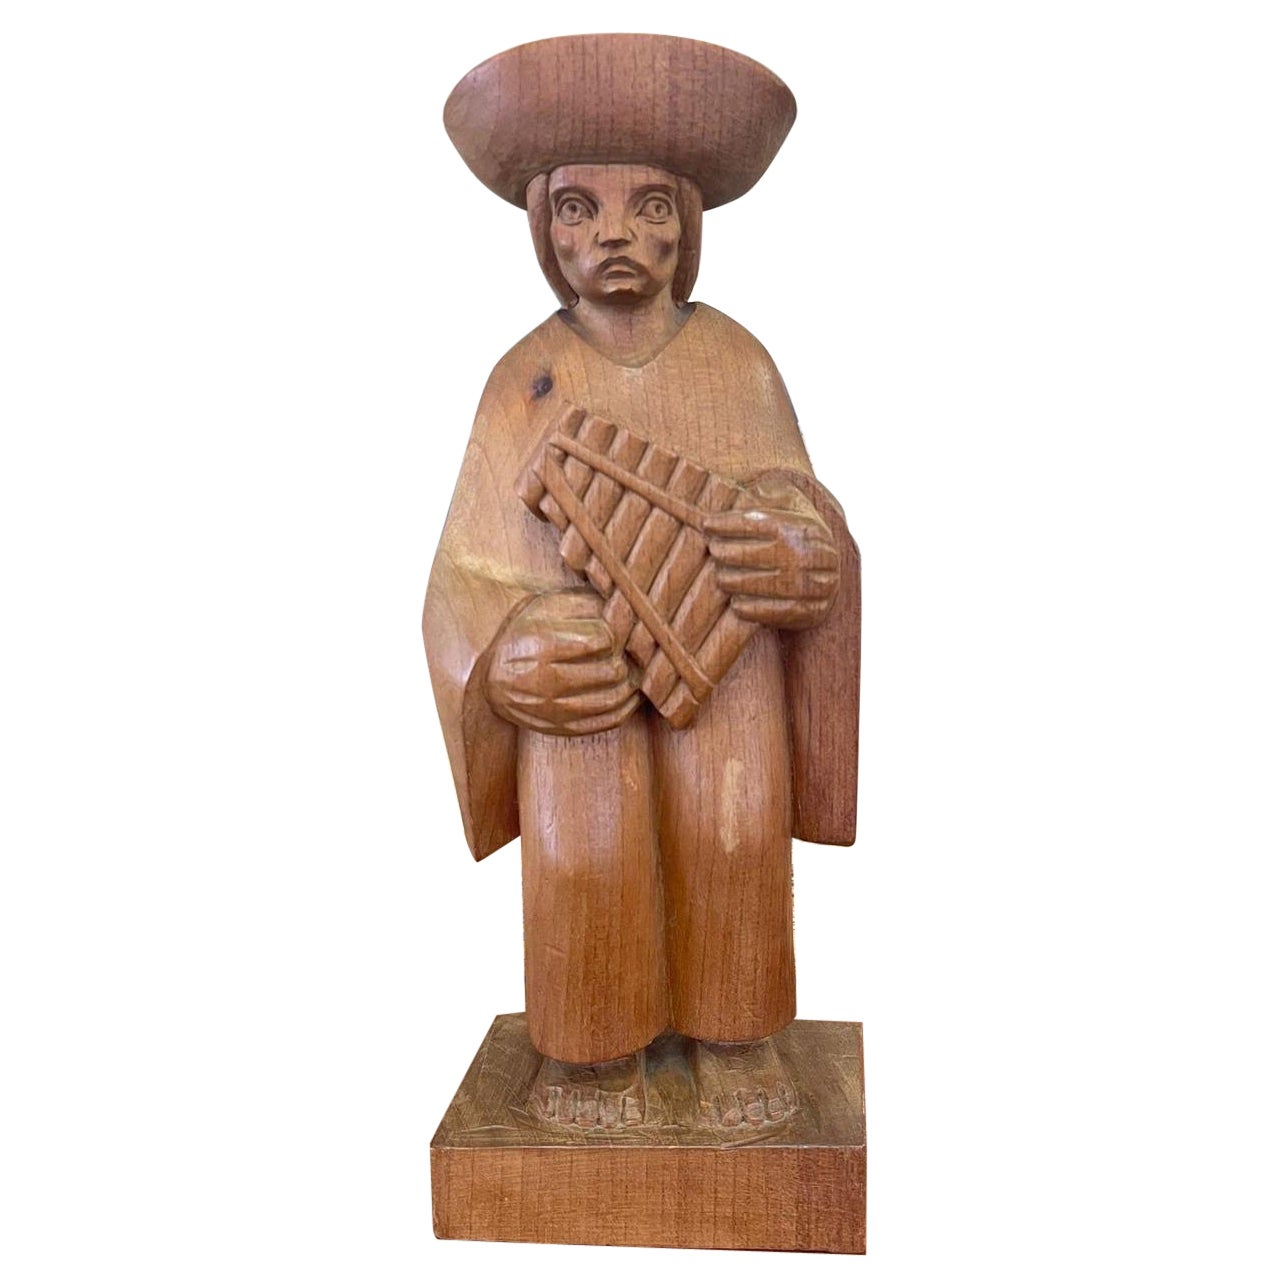 Vintage Hand Carved Wooden Figurines With Flute From Ecuador by Akios Industry.